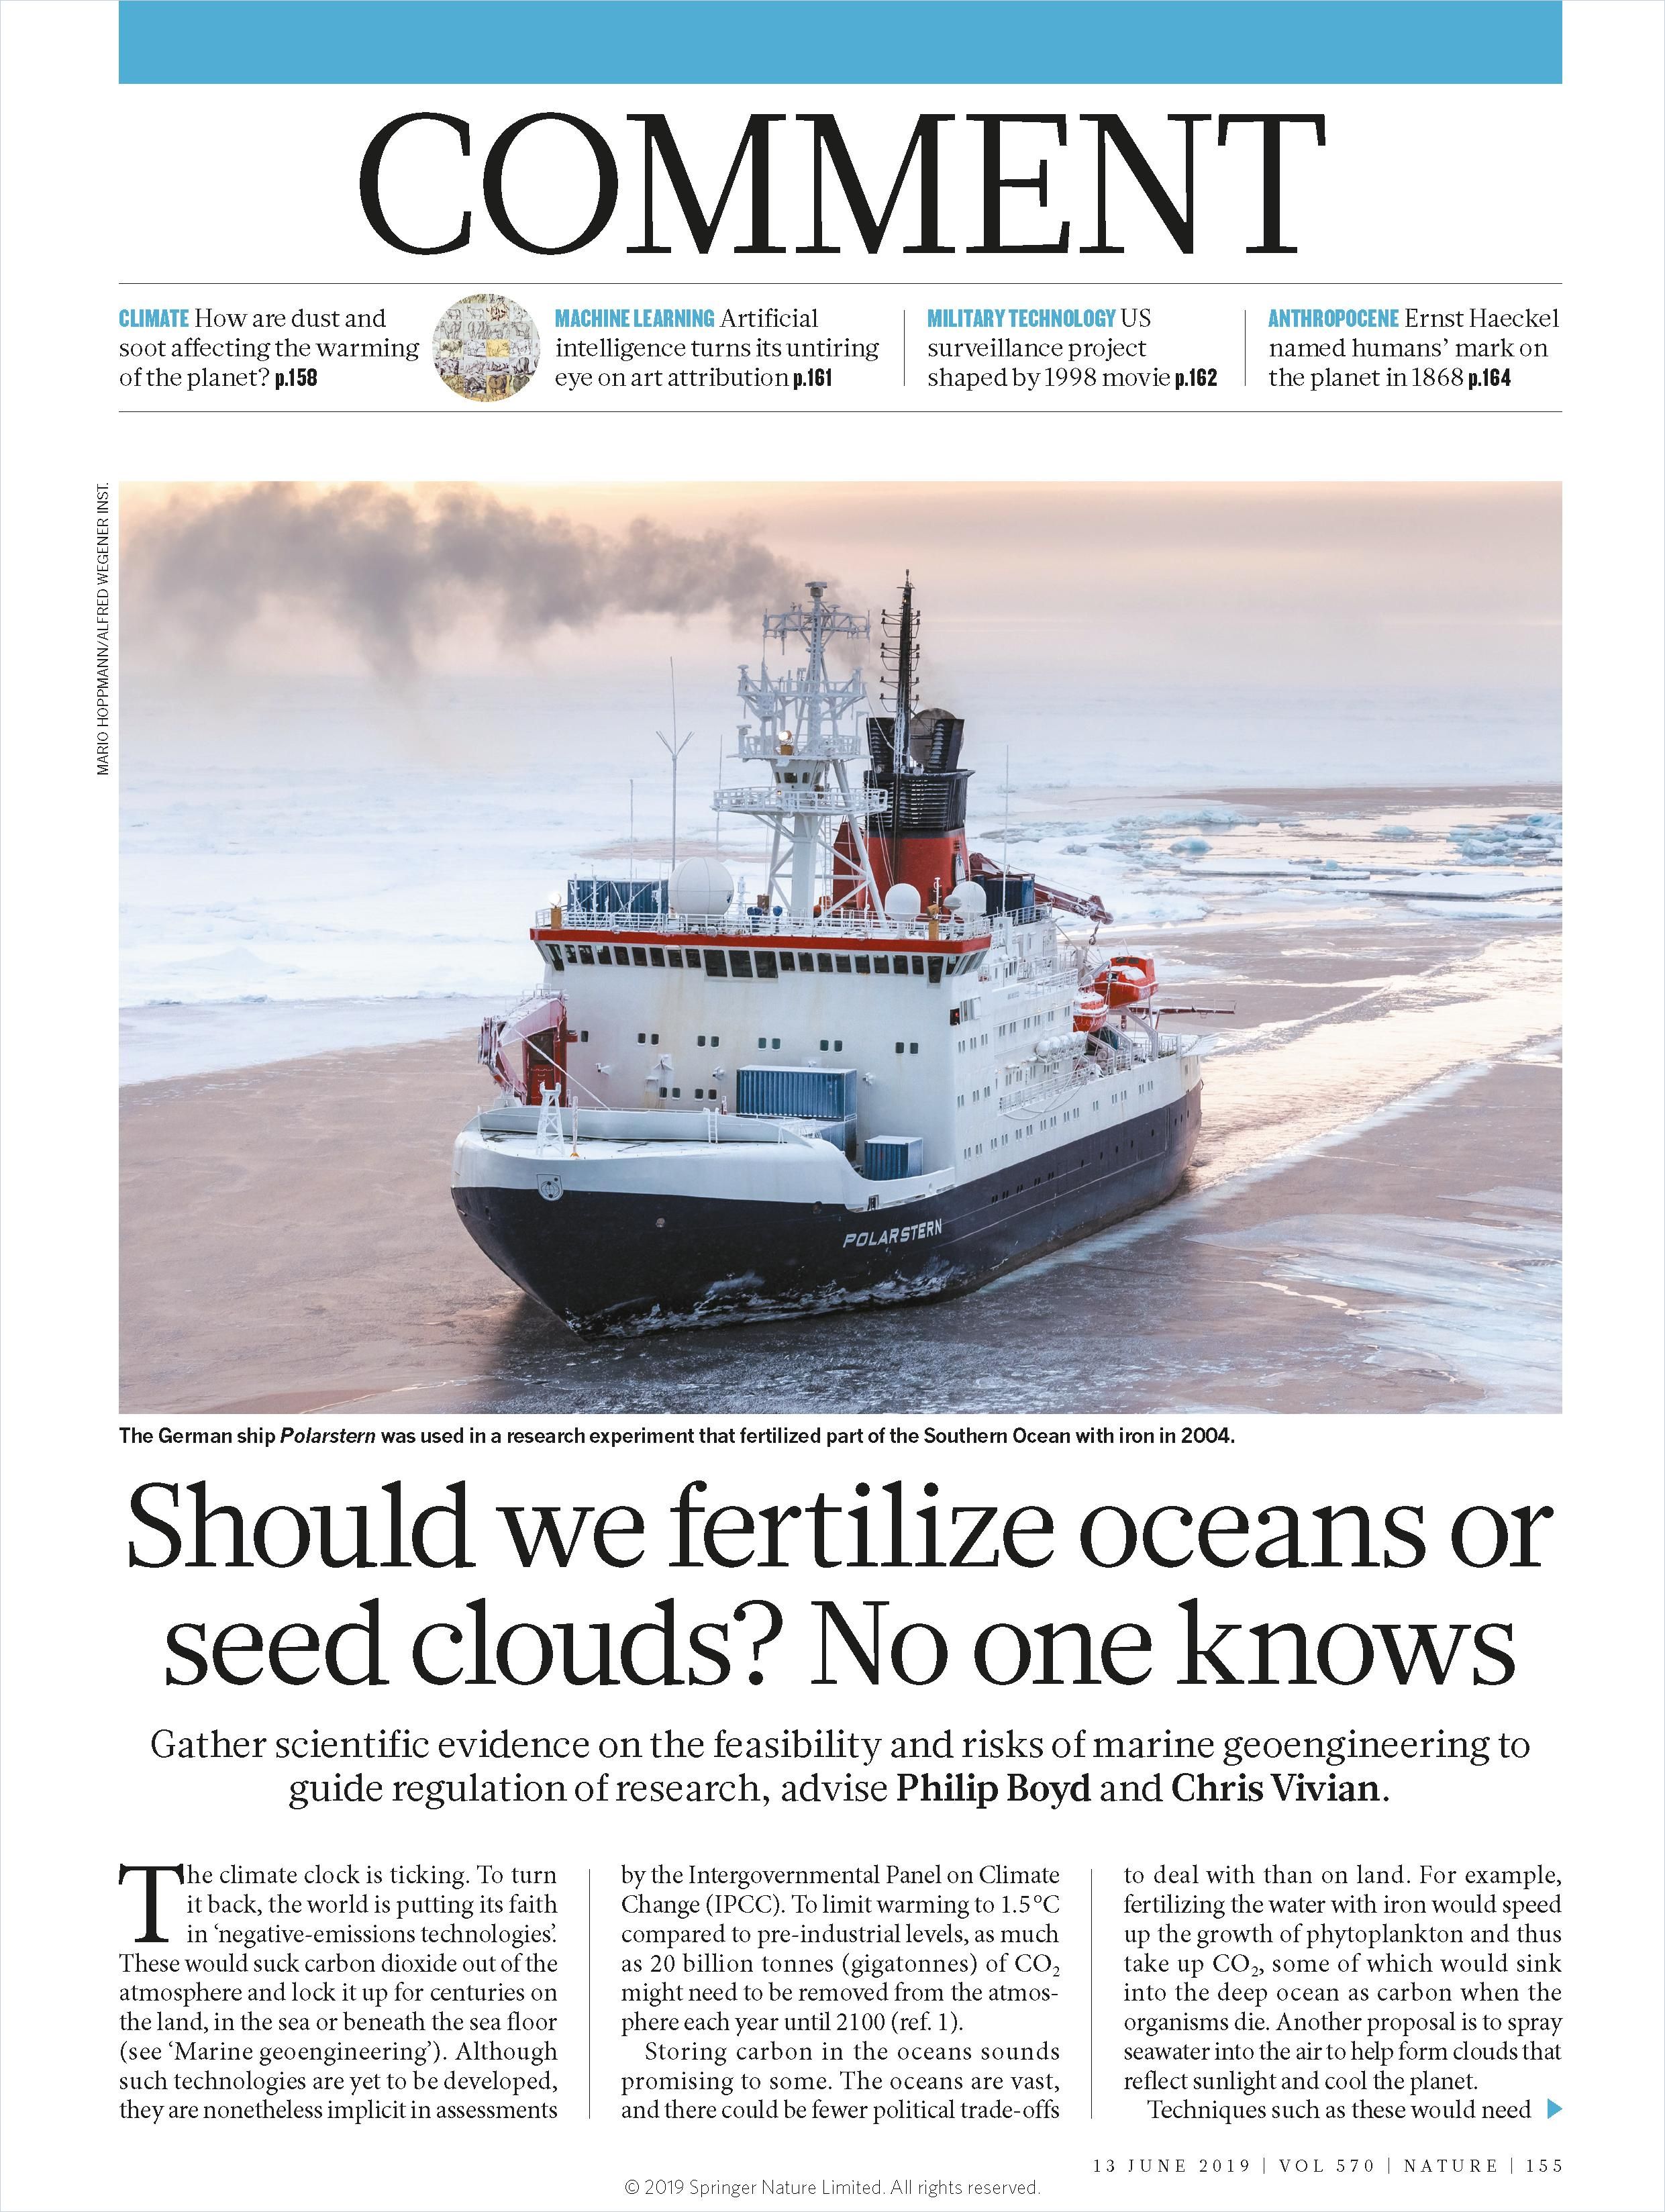 Image of: Should We Fertilize Oceans or Seed Clouds? No One Knows.